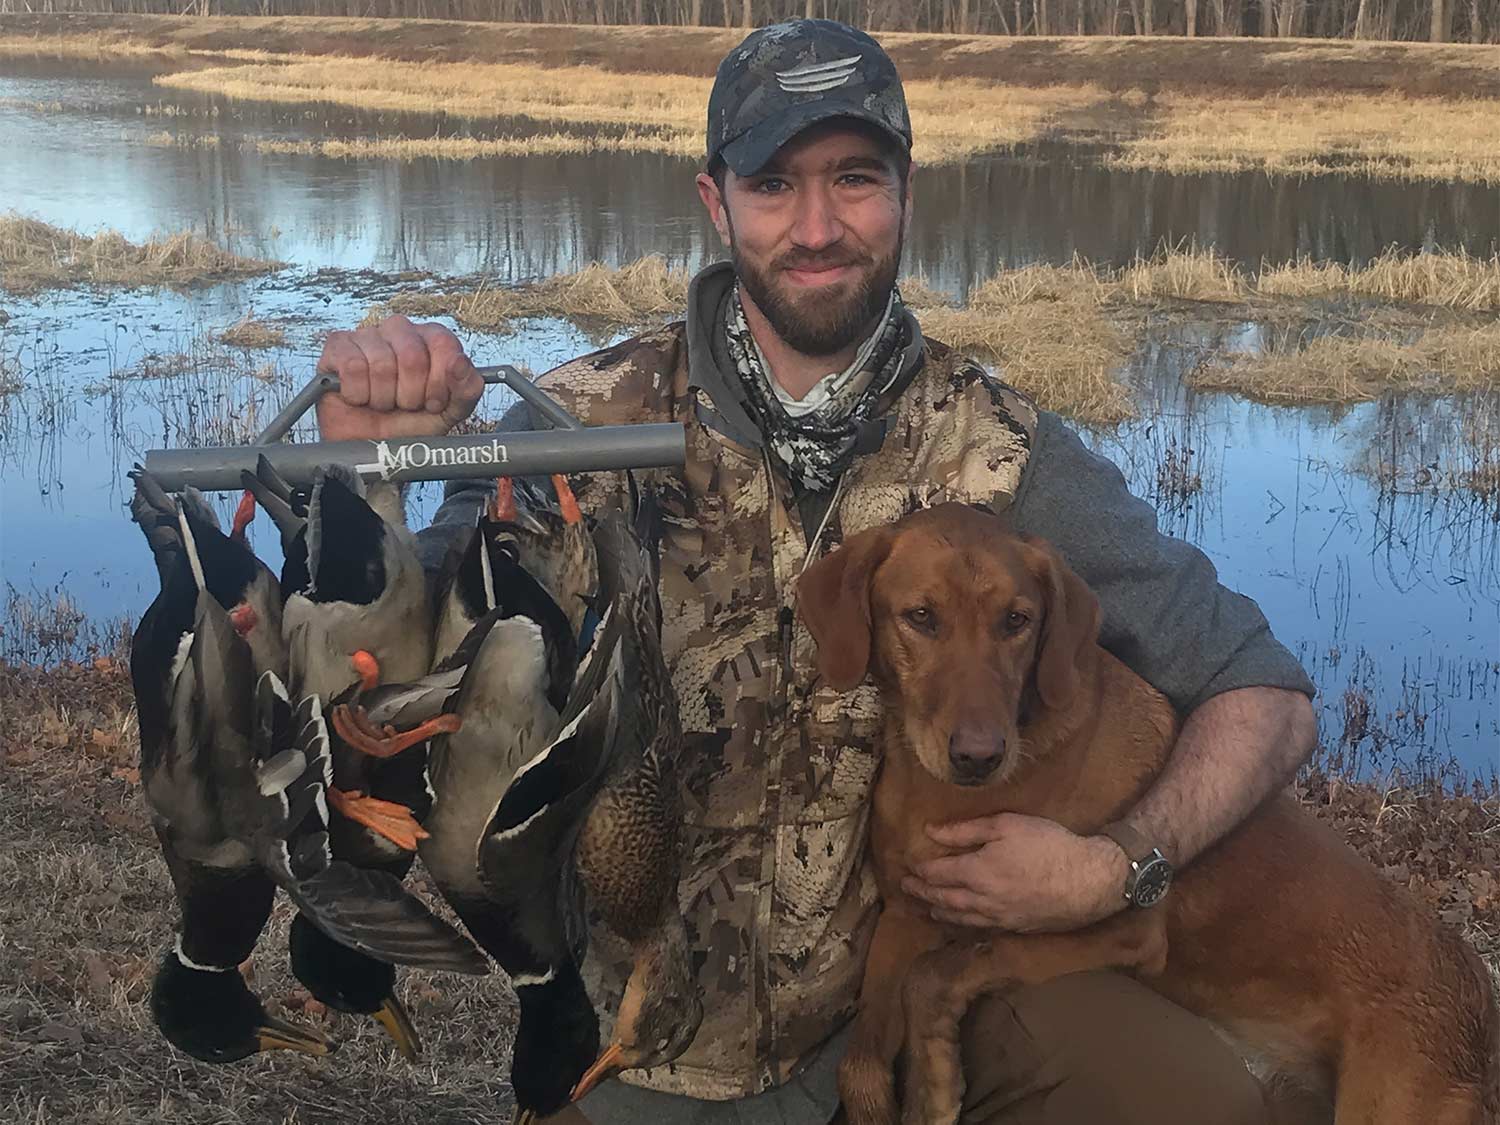 A hunter showing off their ducks and holding their hunting dog.